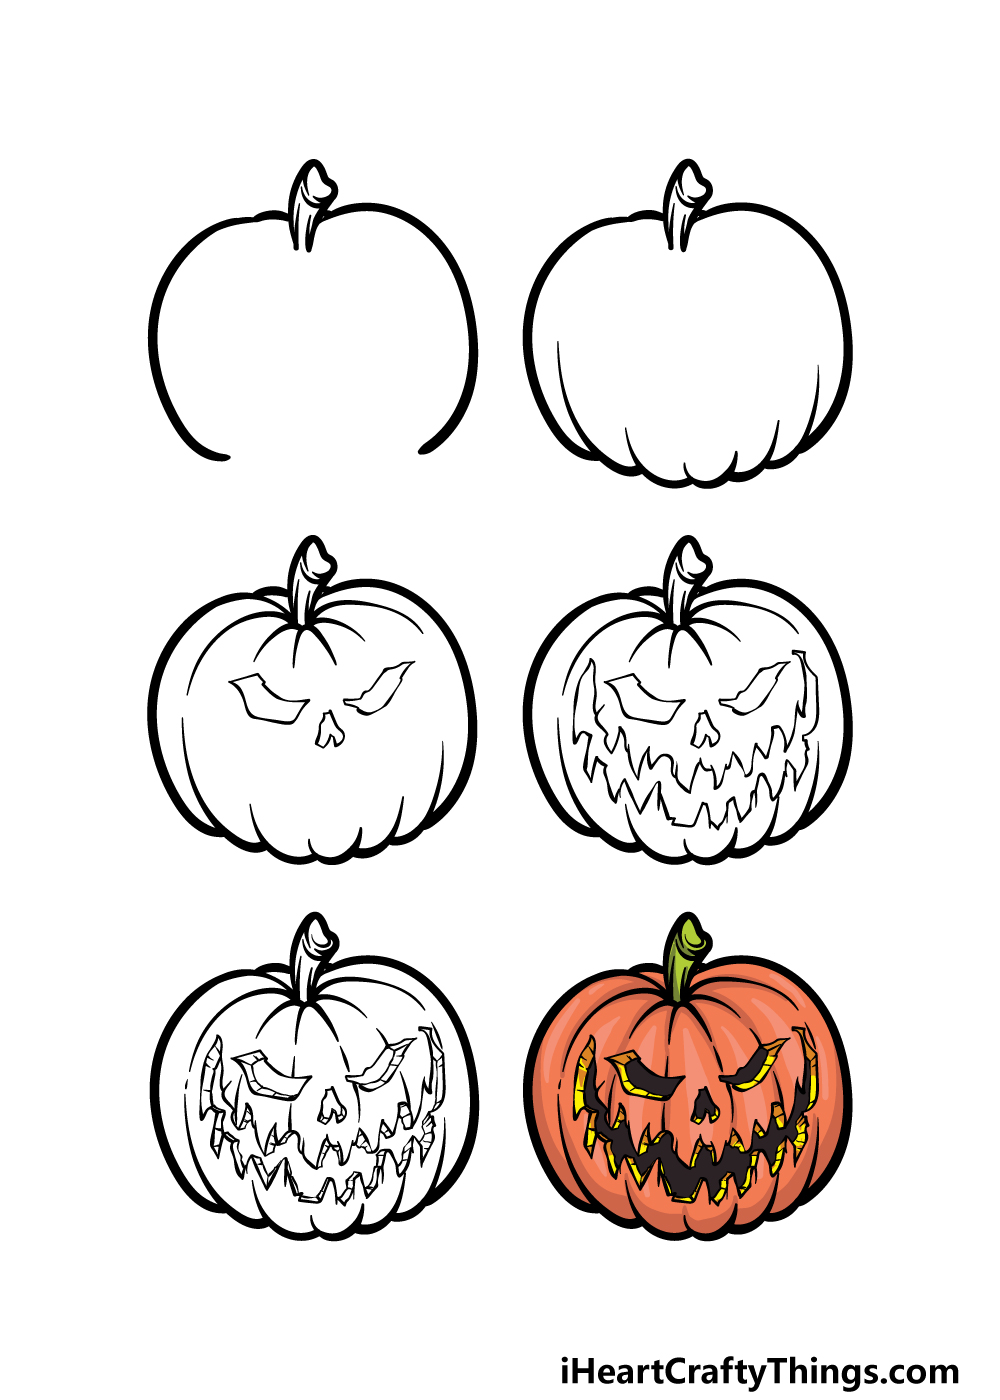 how to draw a Scary Pumpkin in 6 steps